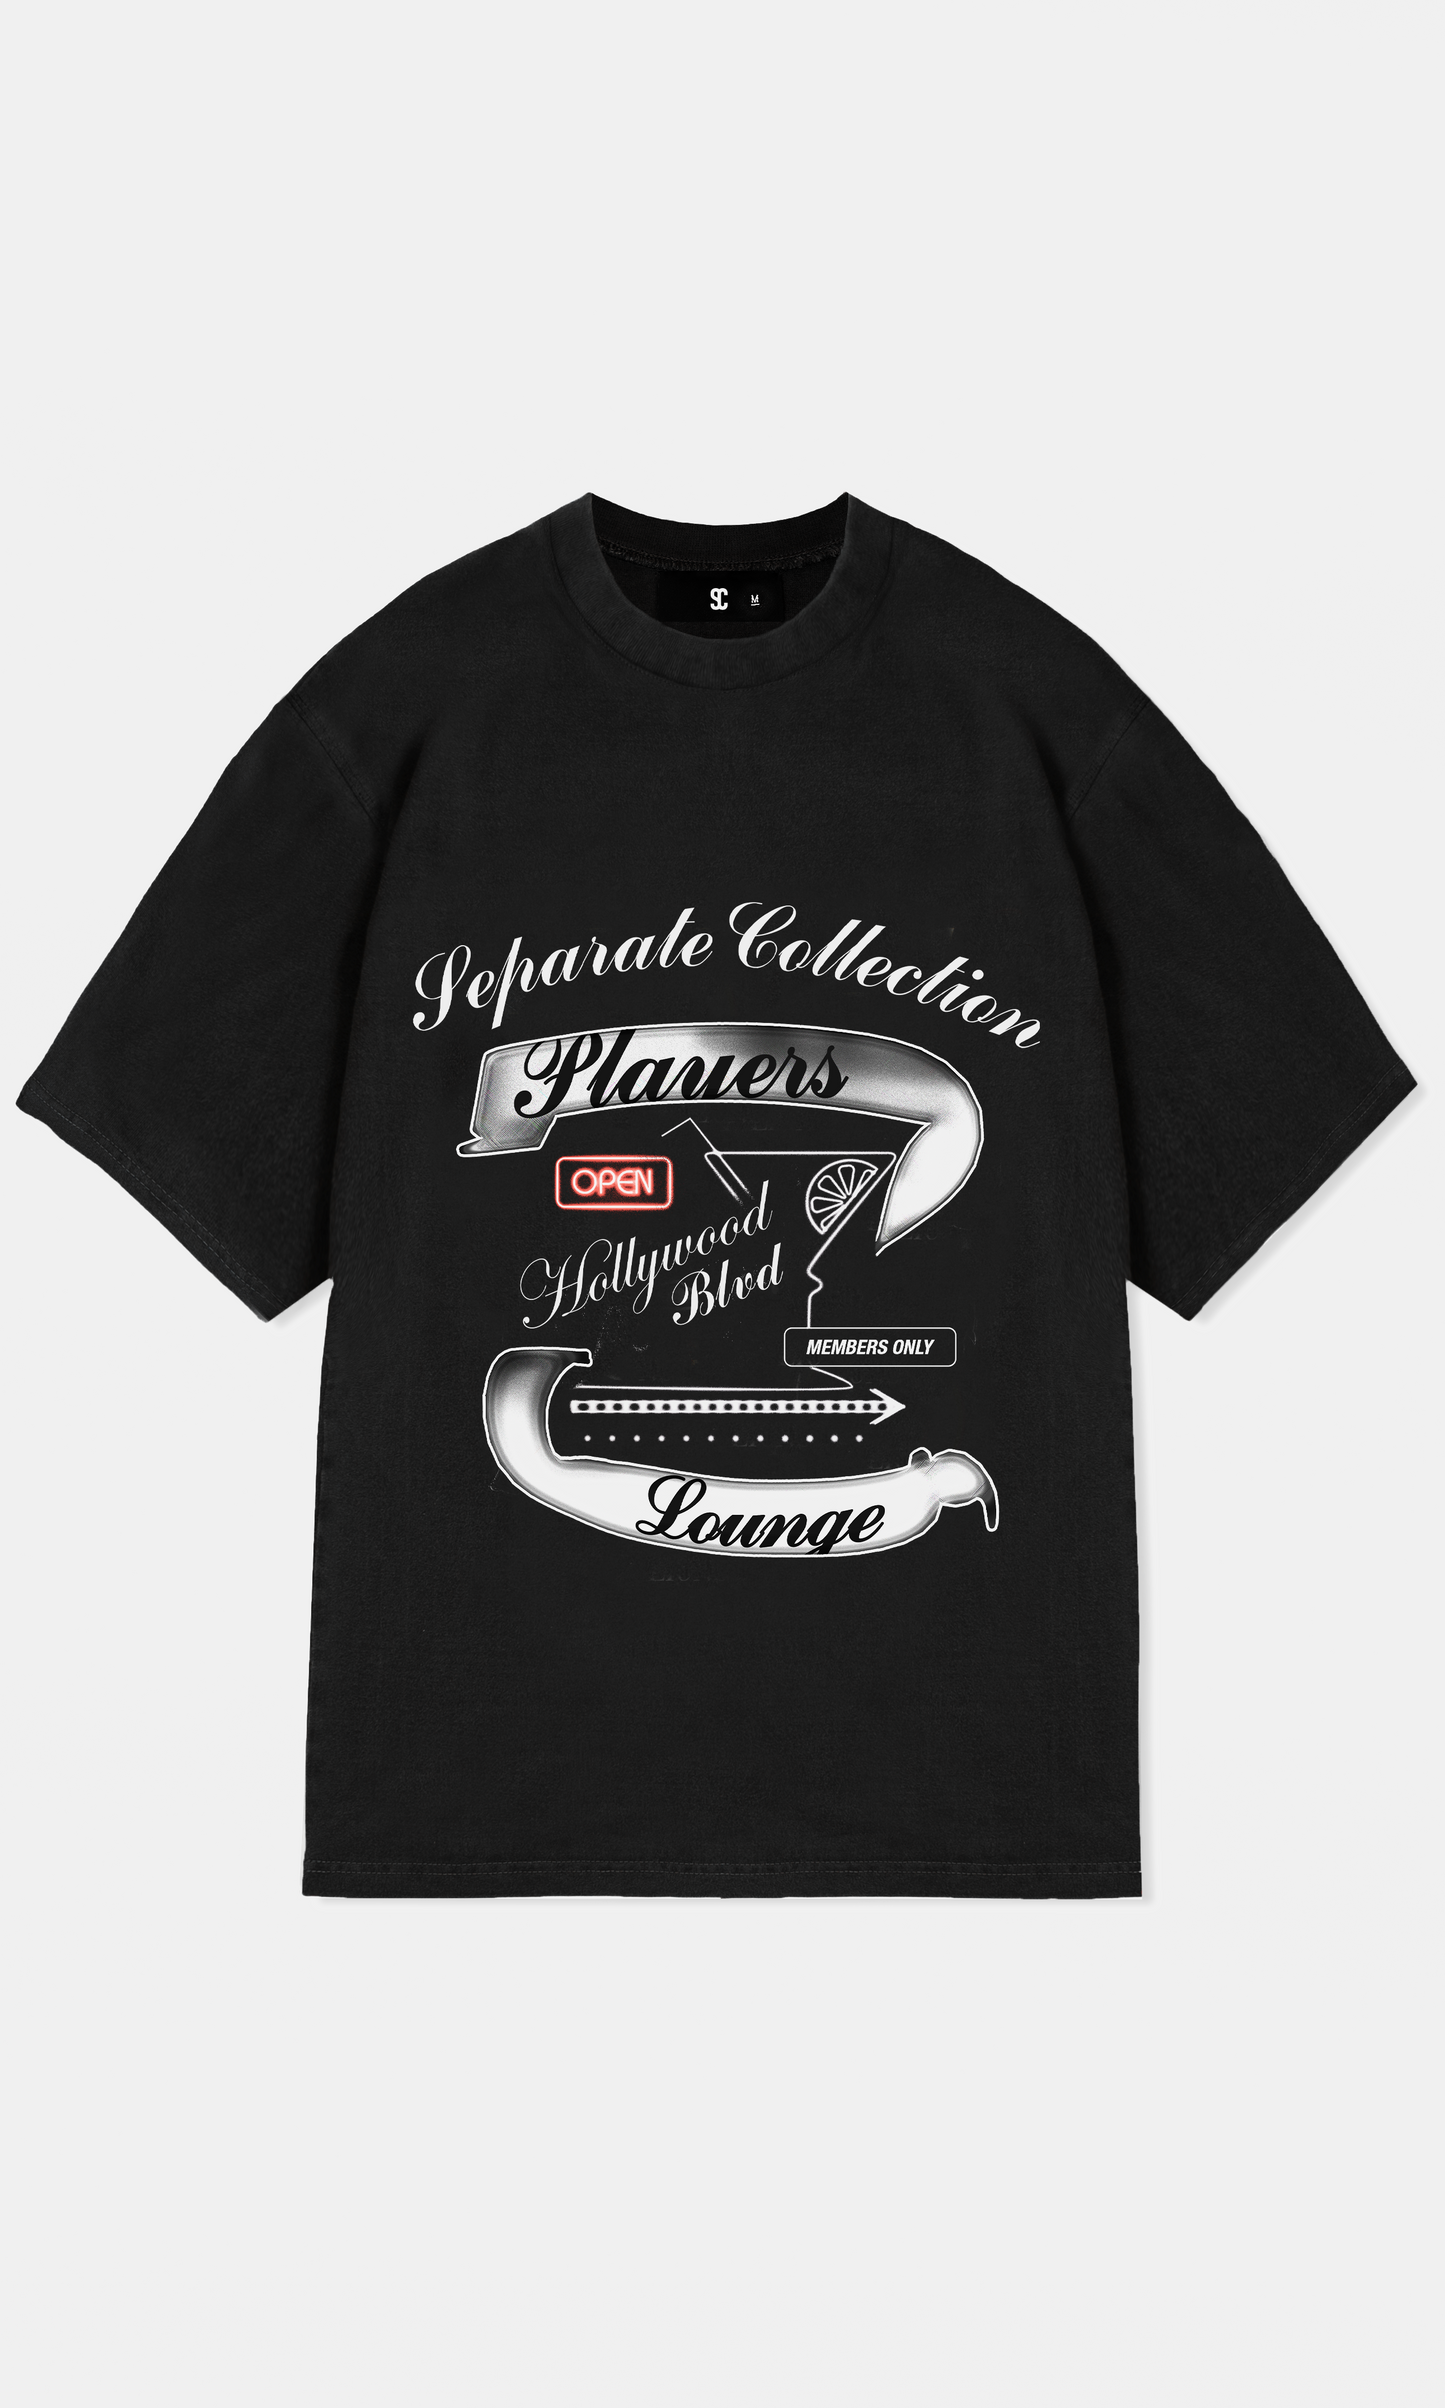 Separate Collection© Players Lounge T-Shirt Jet Black